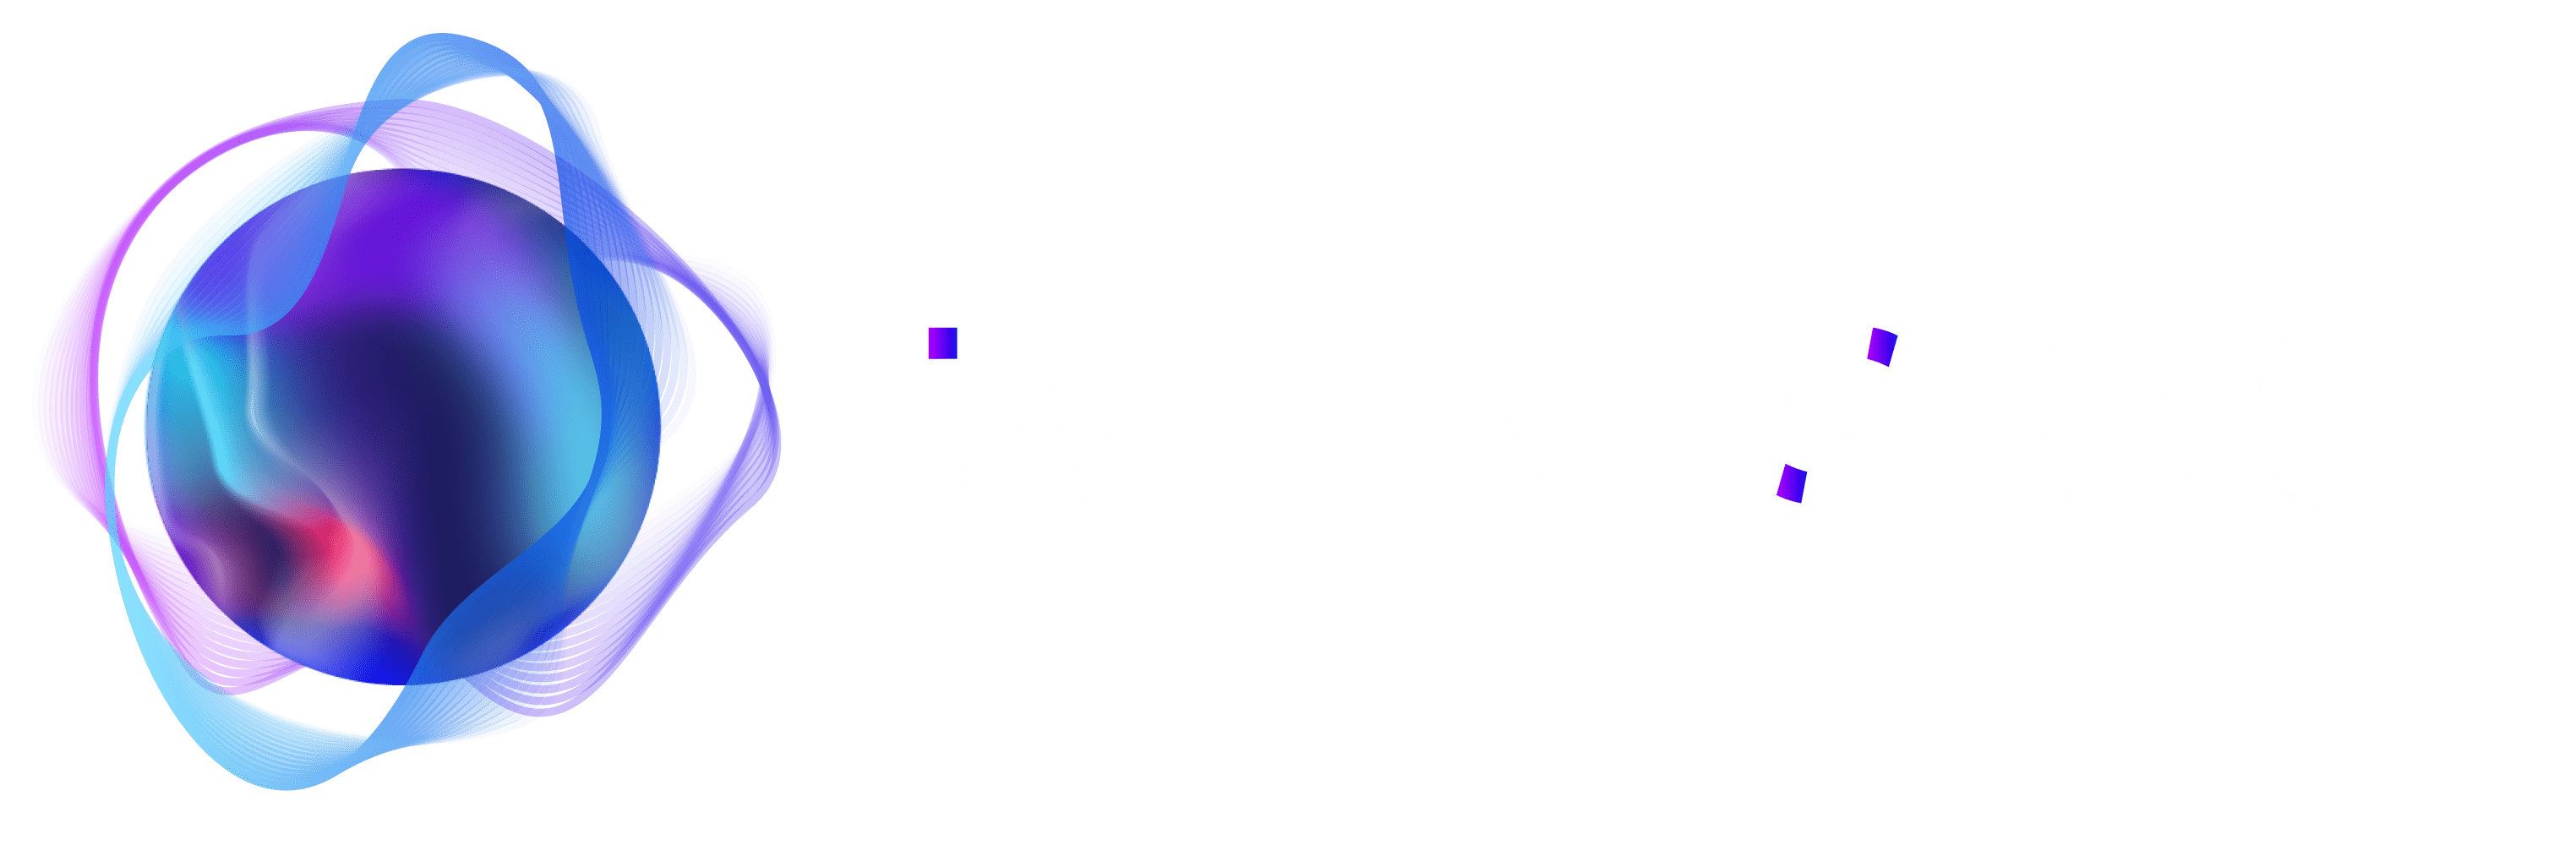 Talentspace.ai Canddiate sourcing